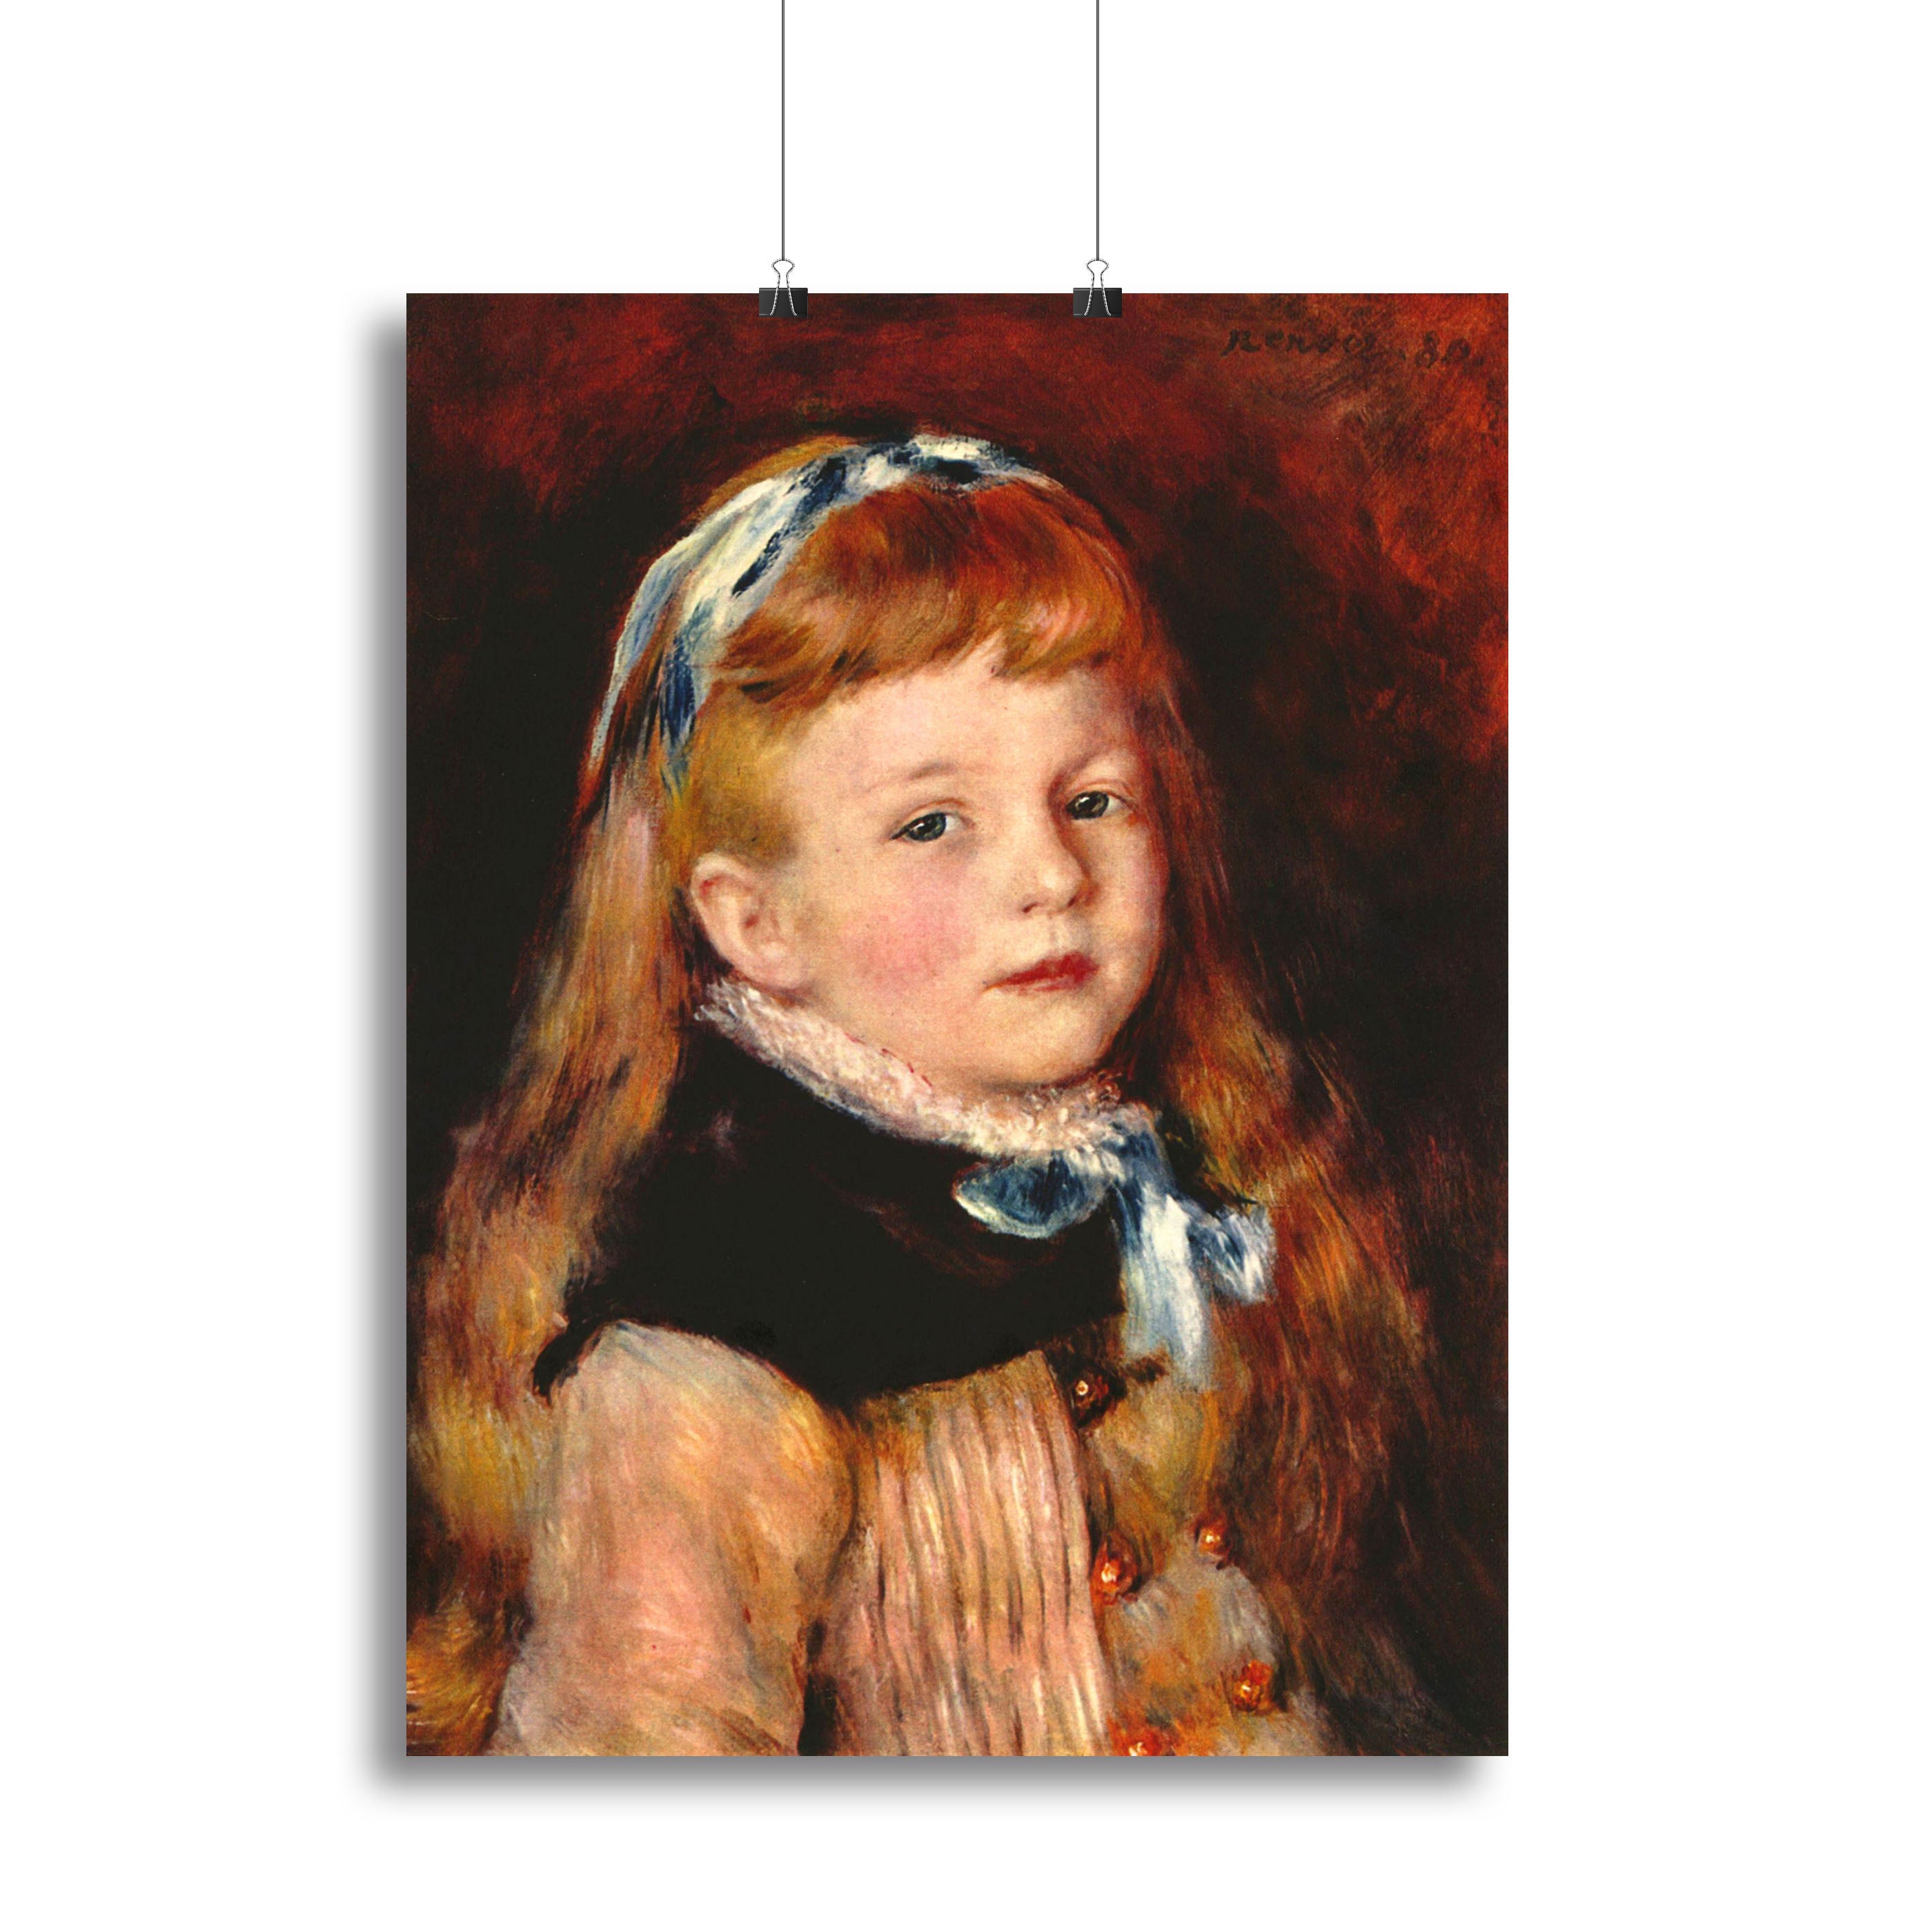 Mademoiselle Grimprel with blue hair band by Renoir Canvas Print or Poster - Canvas Art Rocks - 2